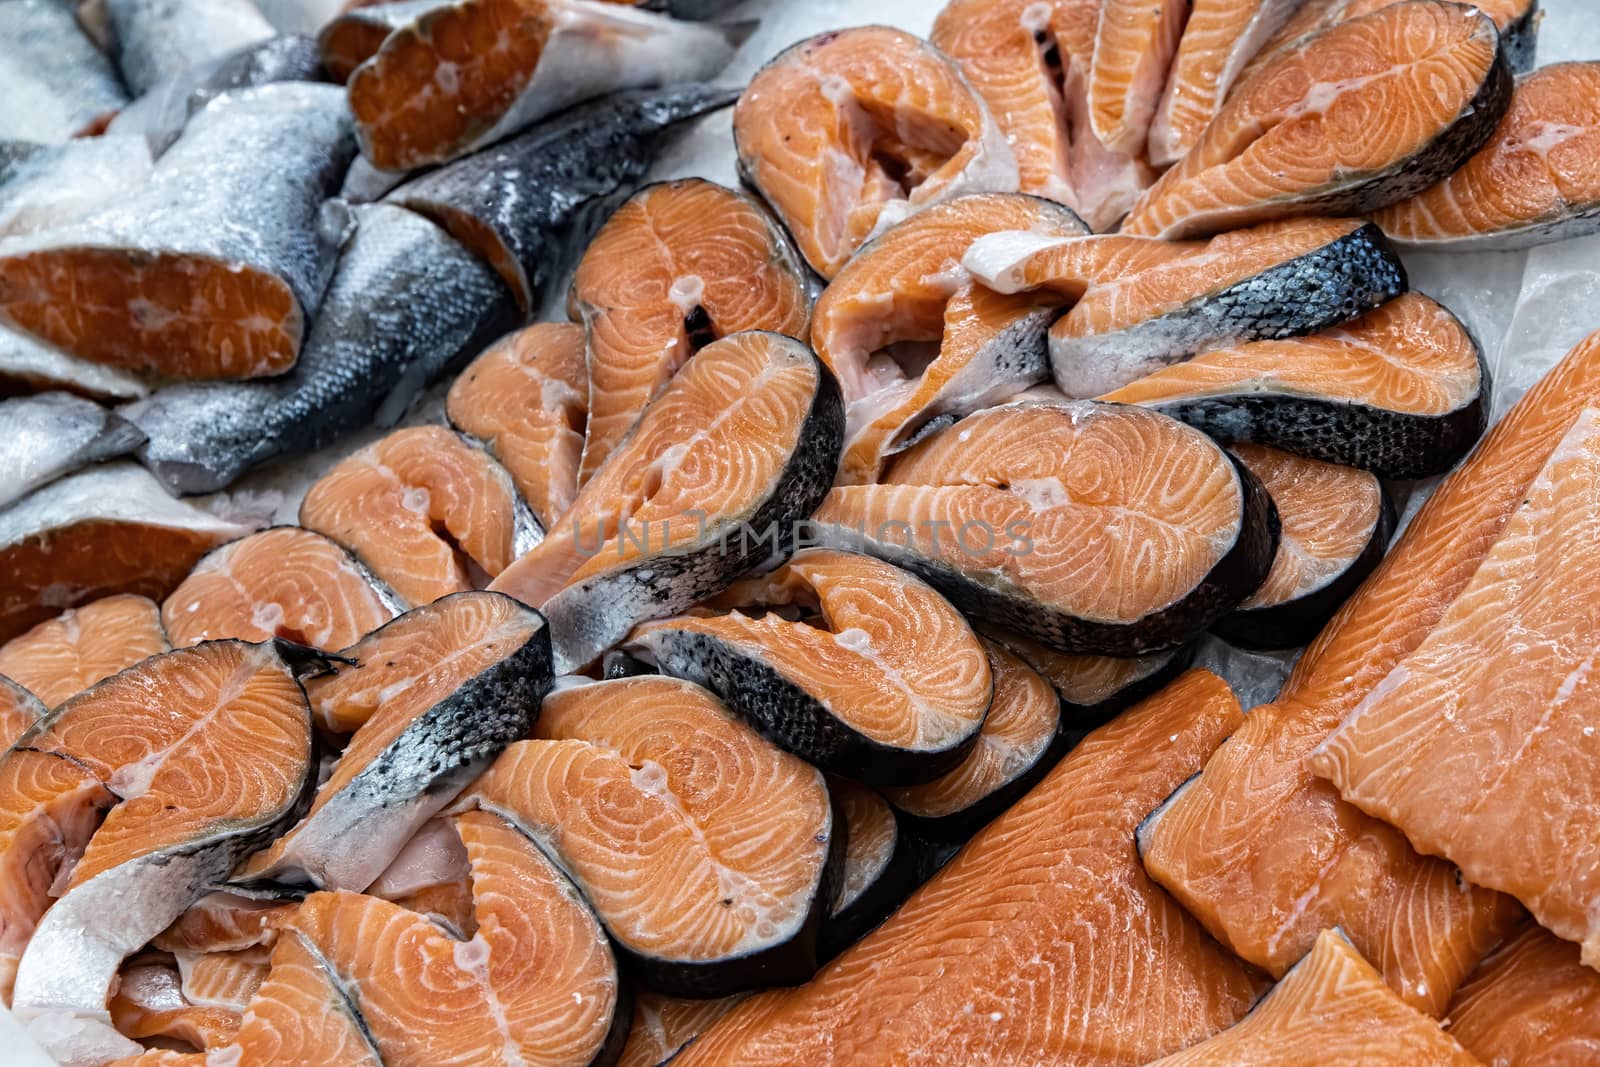 Different types of fresh fish on ice in supermarket, top view. Close up fresh fish on ice bucket or frozen fish in grocery store use for raw food background